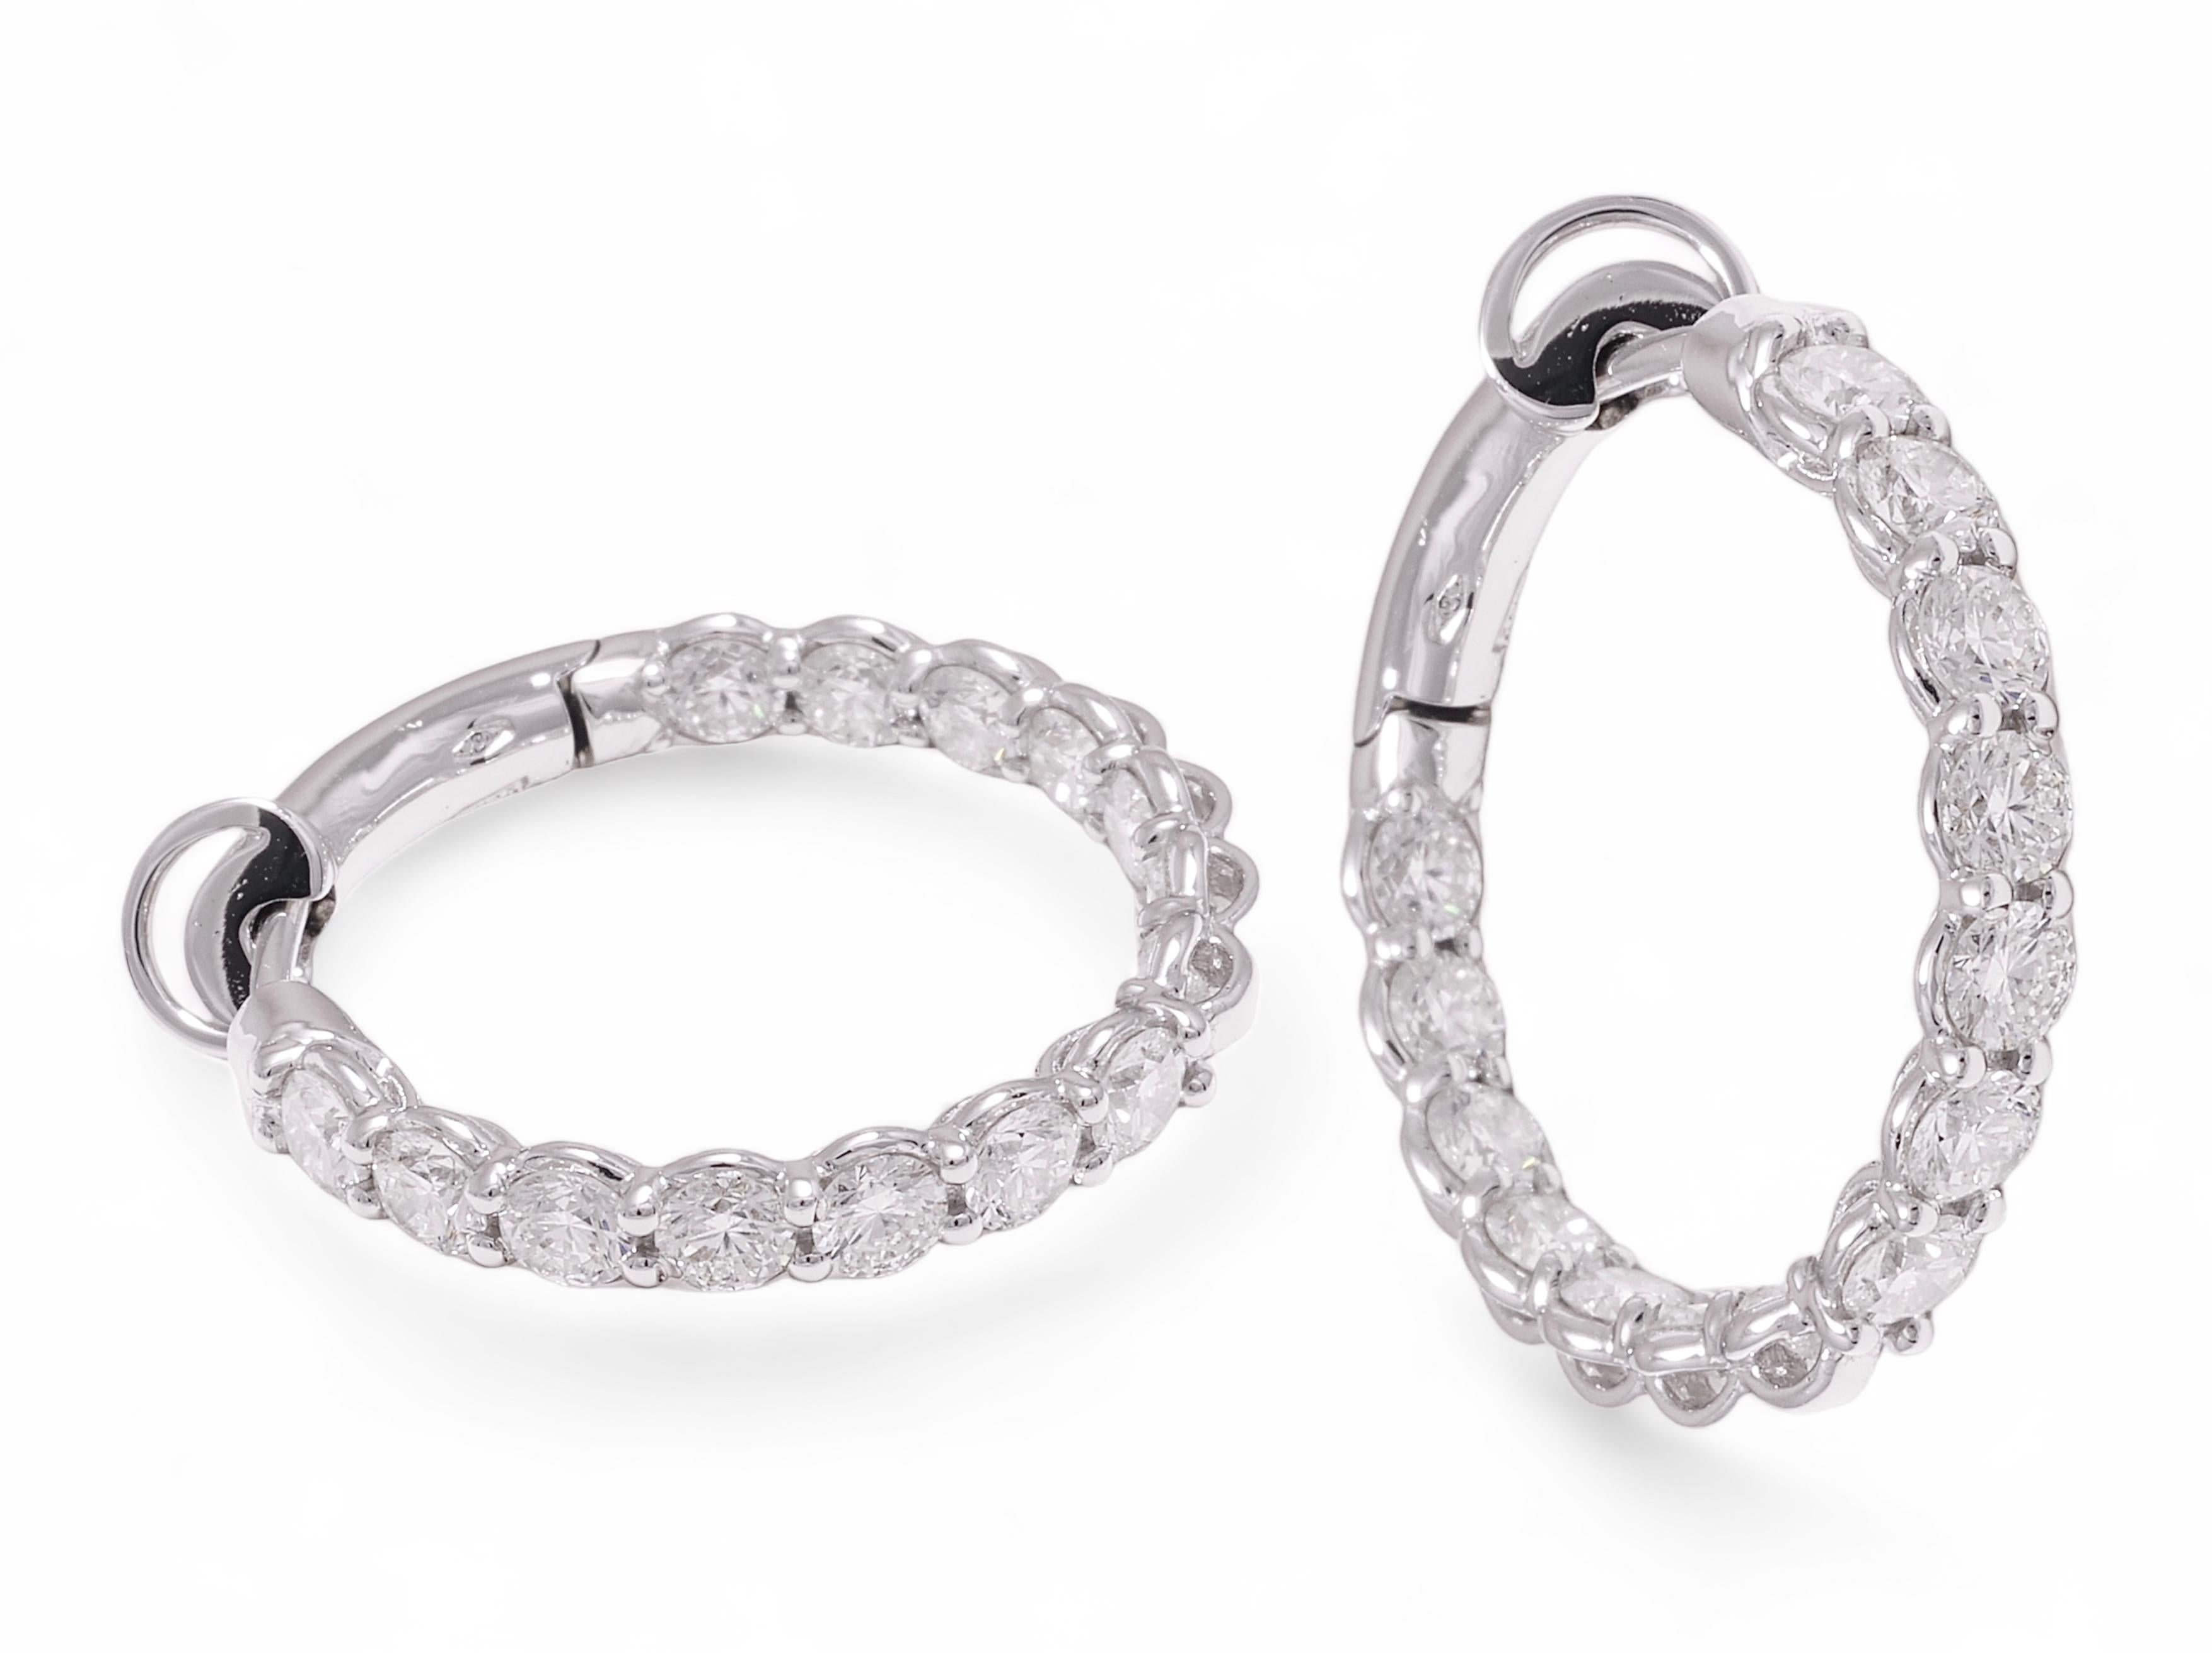  18 kt. White Gold Loop Earrings With 3.14 ct. Diamonds  In New Condition For Sale In Antwerp, BE